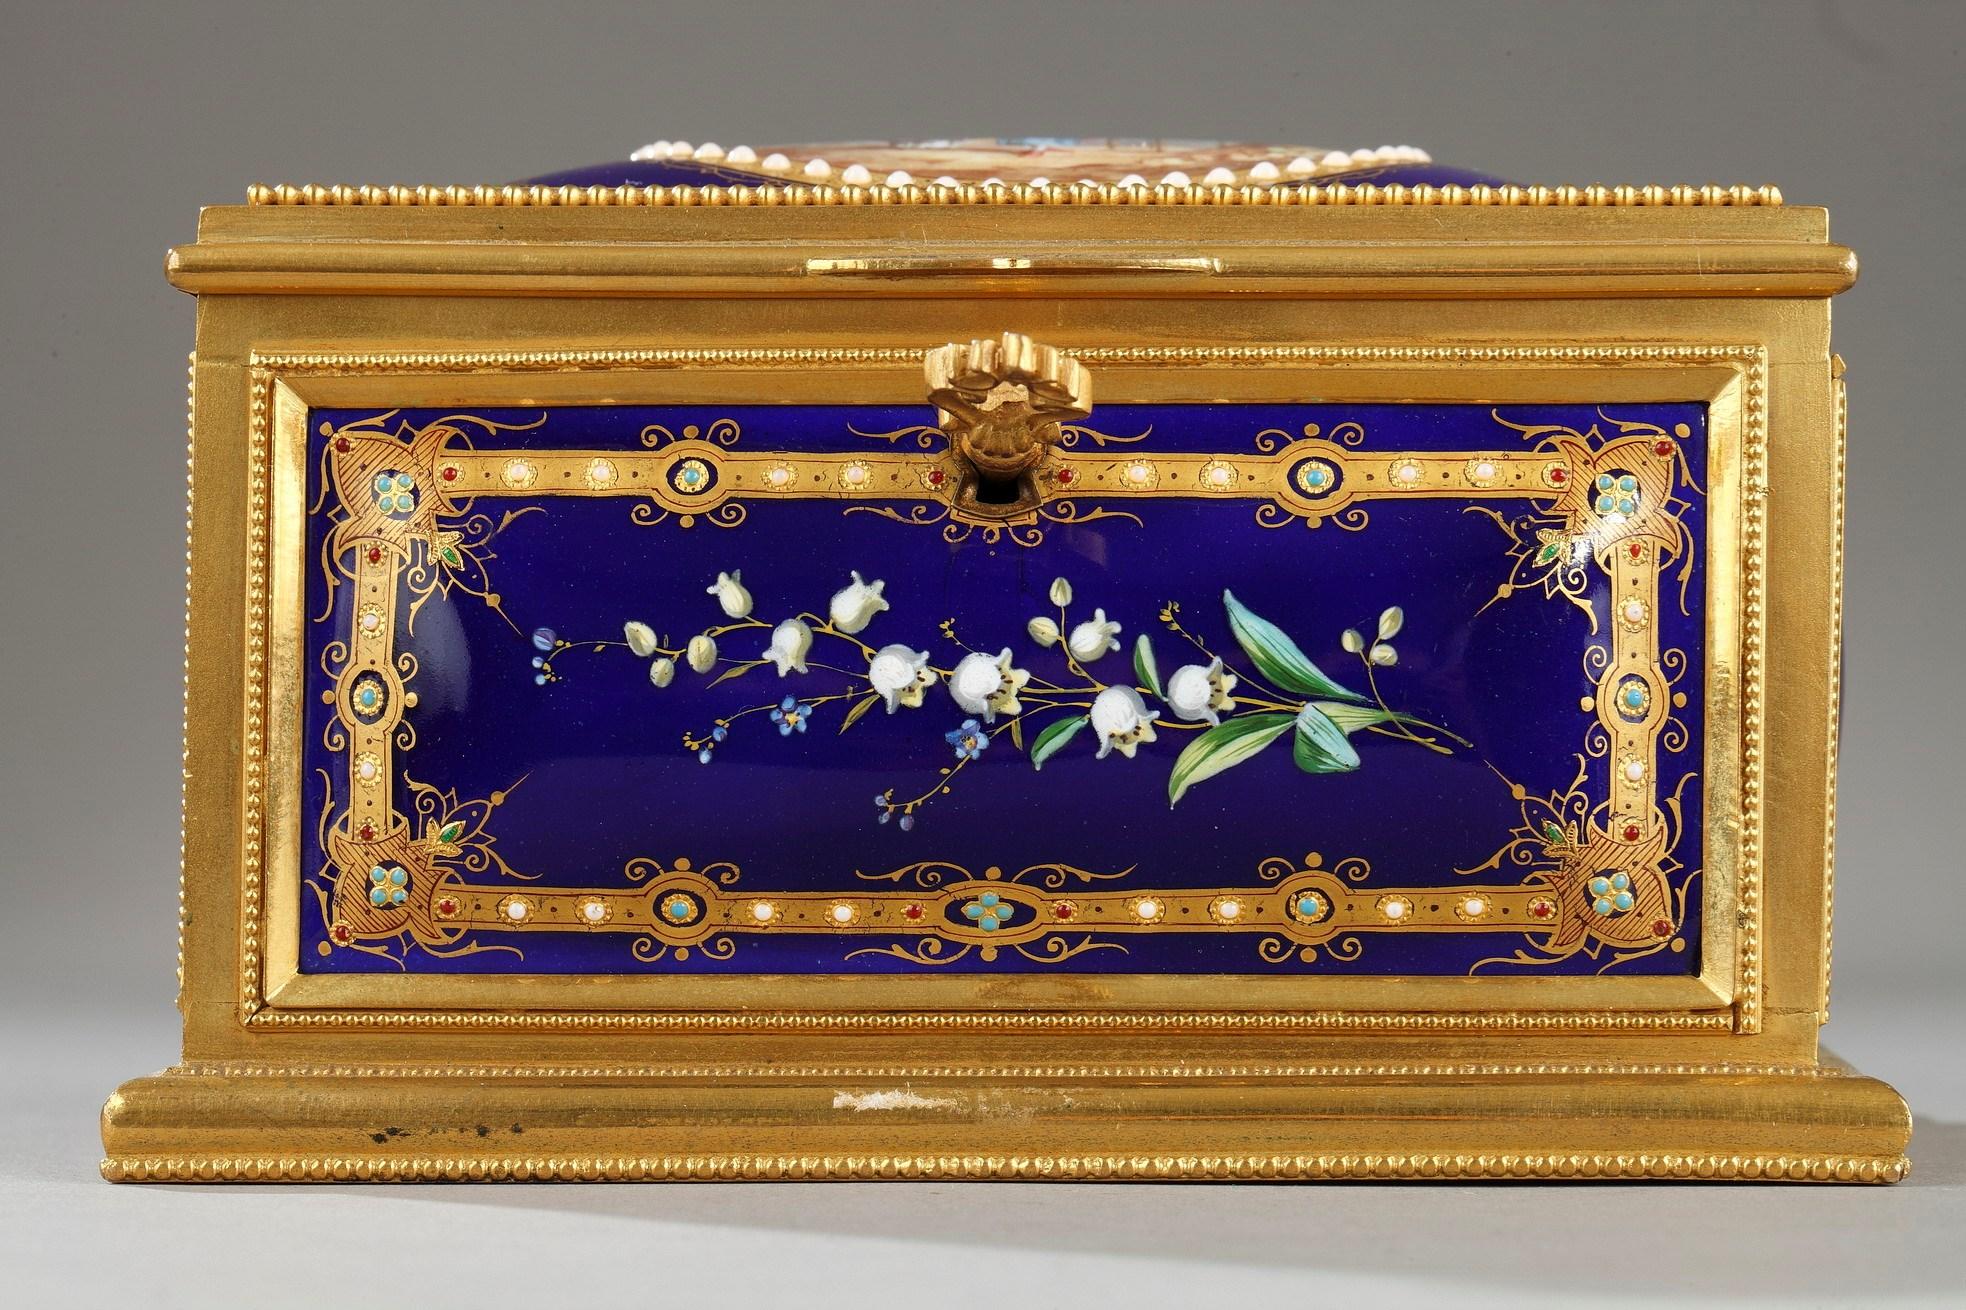 Late 19th Century 19th Century Casket in Enamel and Gilt Bronze Mount, Signed Tahan